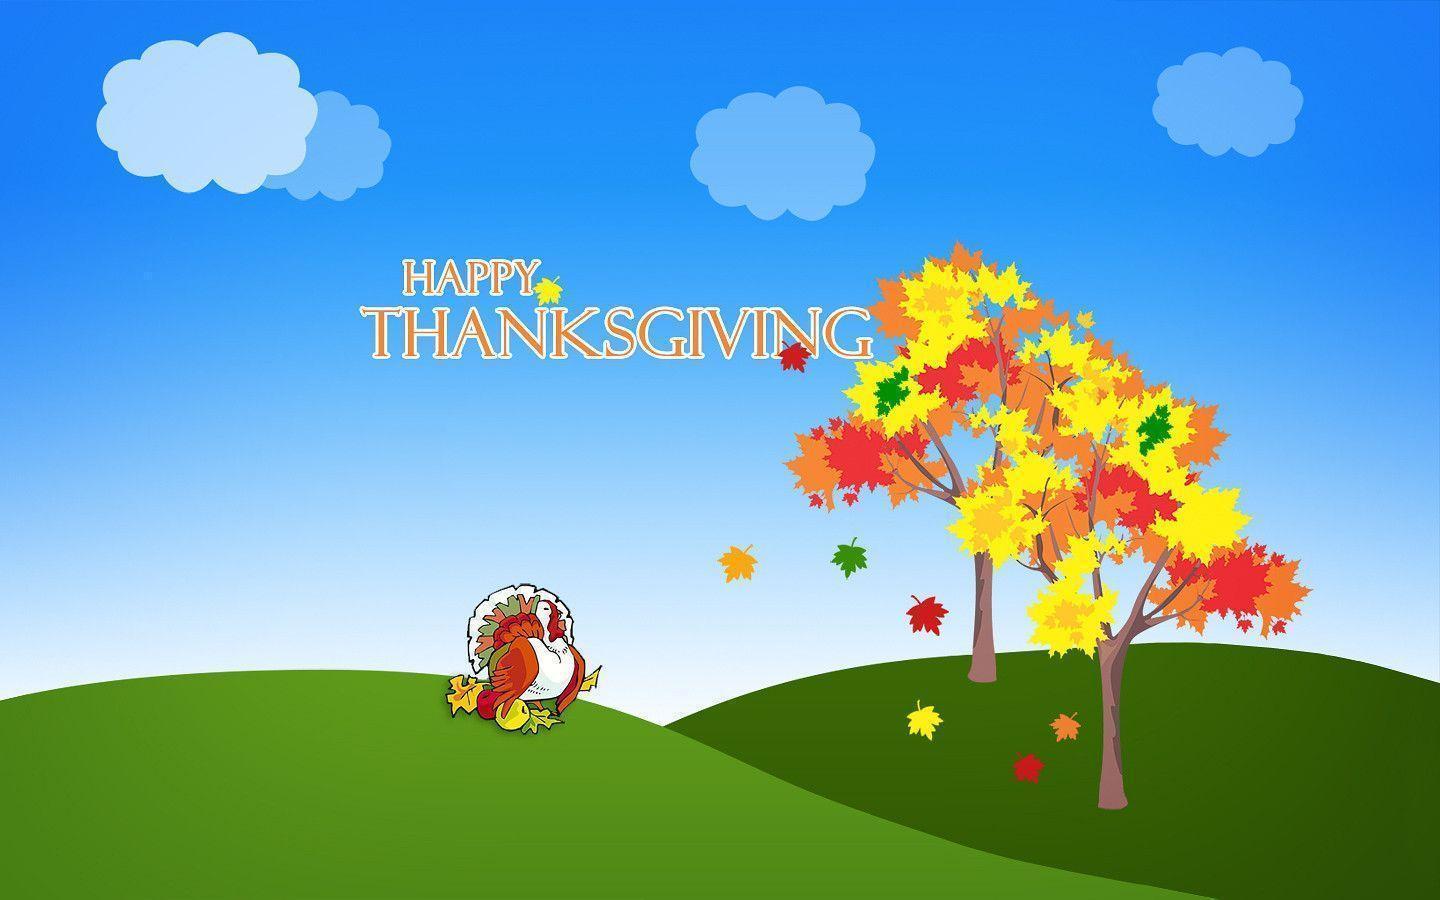 Funny Thanksgiving Wallpaper Background Download Image 26732